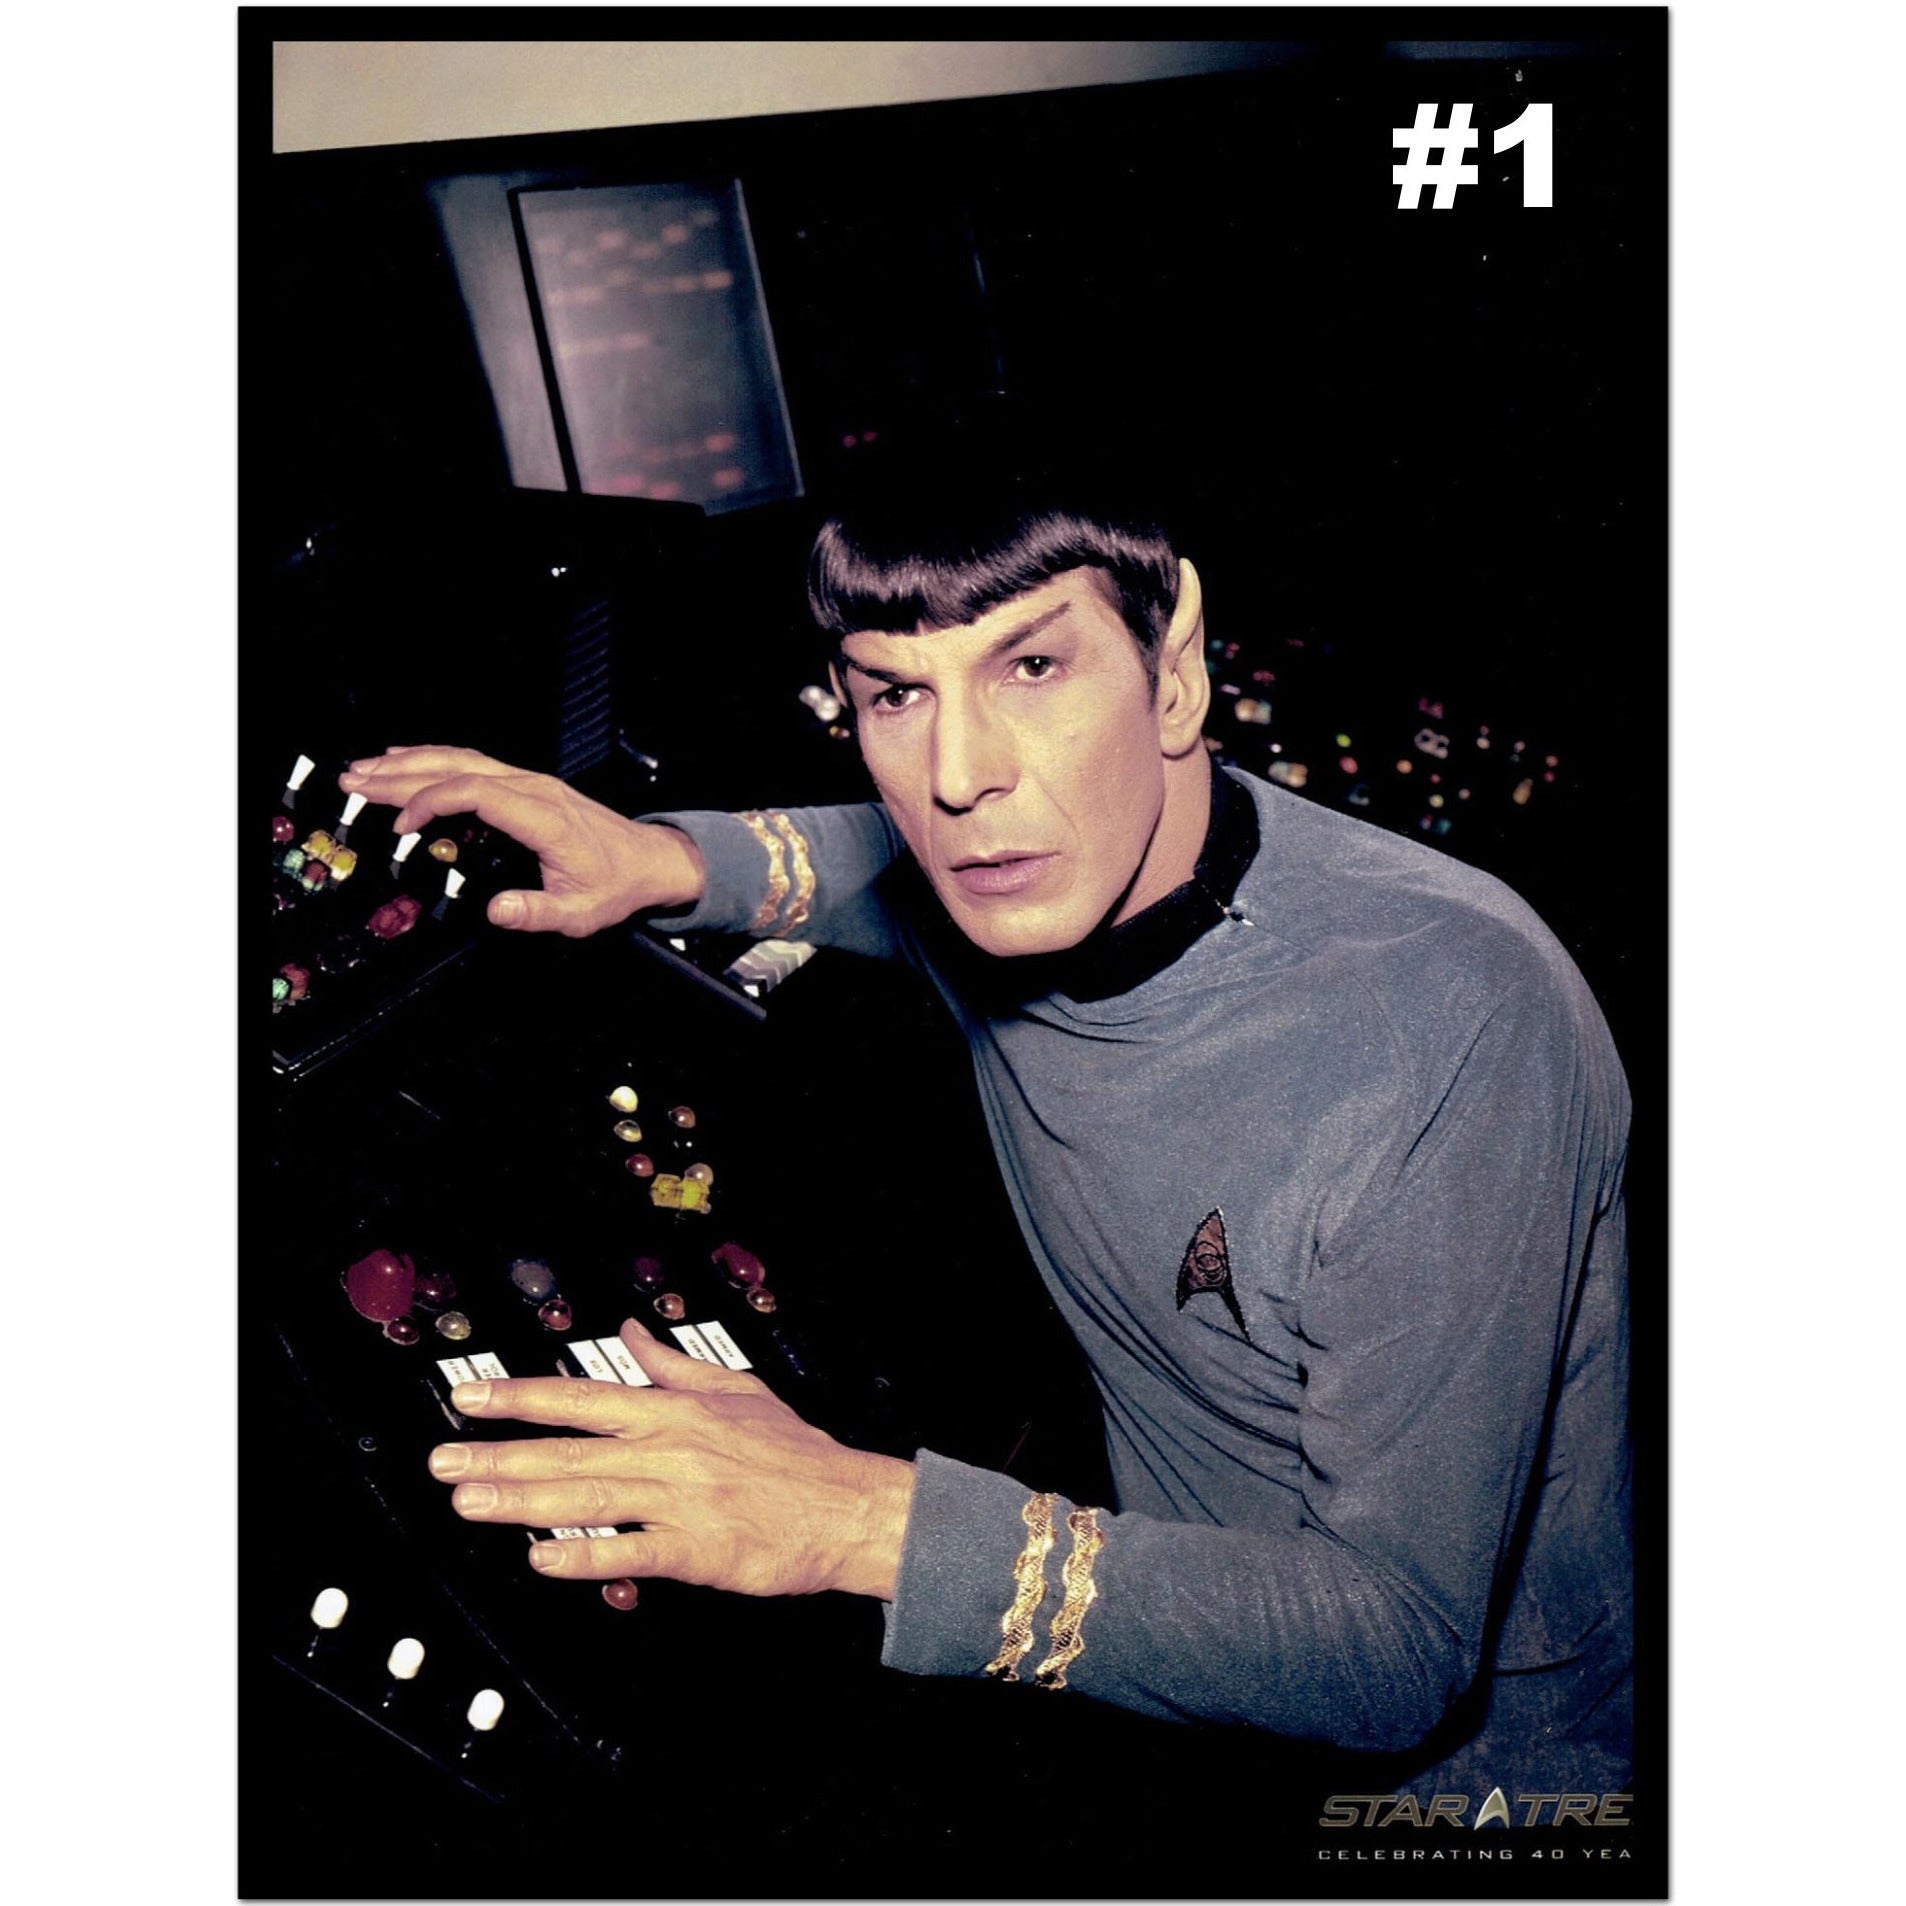 Star Trek and Mr. Spock Unsigned Photos from Leonard Nimoy's Personal Collection - Leonard Nimoy's Shop LLAP